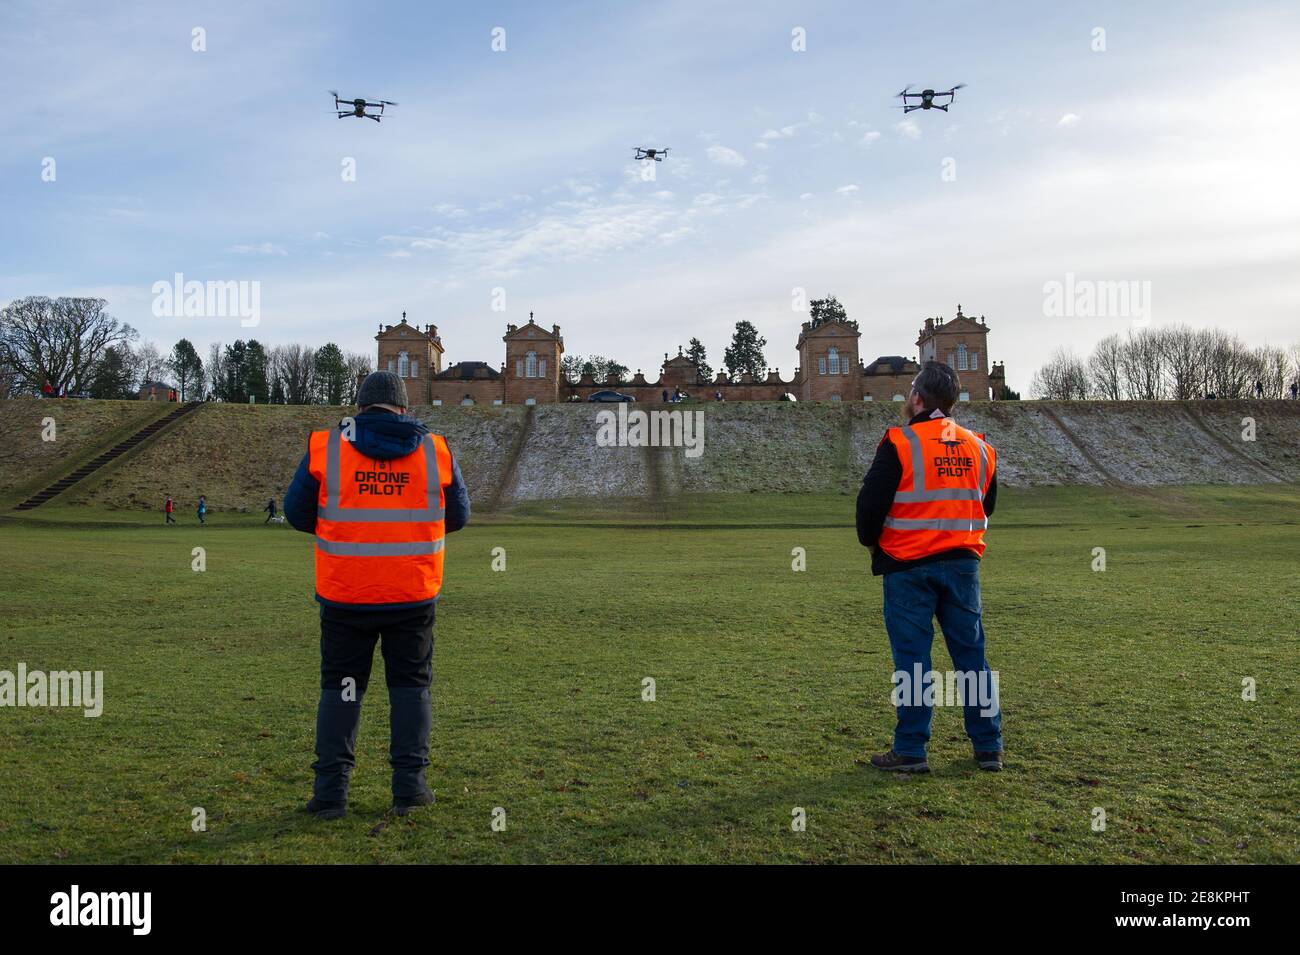 Hamilton, Scotland, UK. 31st Jan, 2021. Pictured: Professional drone pilots flying their drones seen in Chatelherault Country Park as others take in exercise as the temperature stays just above freezing. The sun is out and people are enjoying themselves during the coronavirus phase 4 lockdown. Credit: Colin Fisher/Alamy Live News Stock Photo